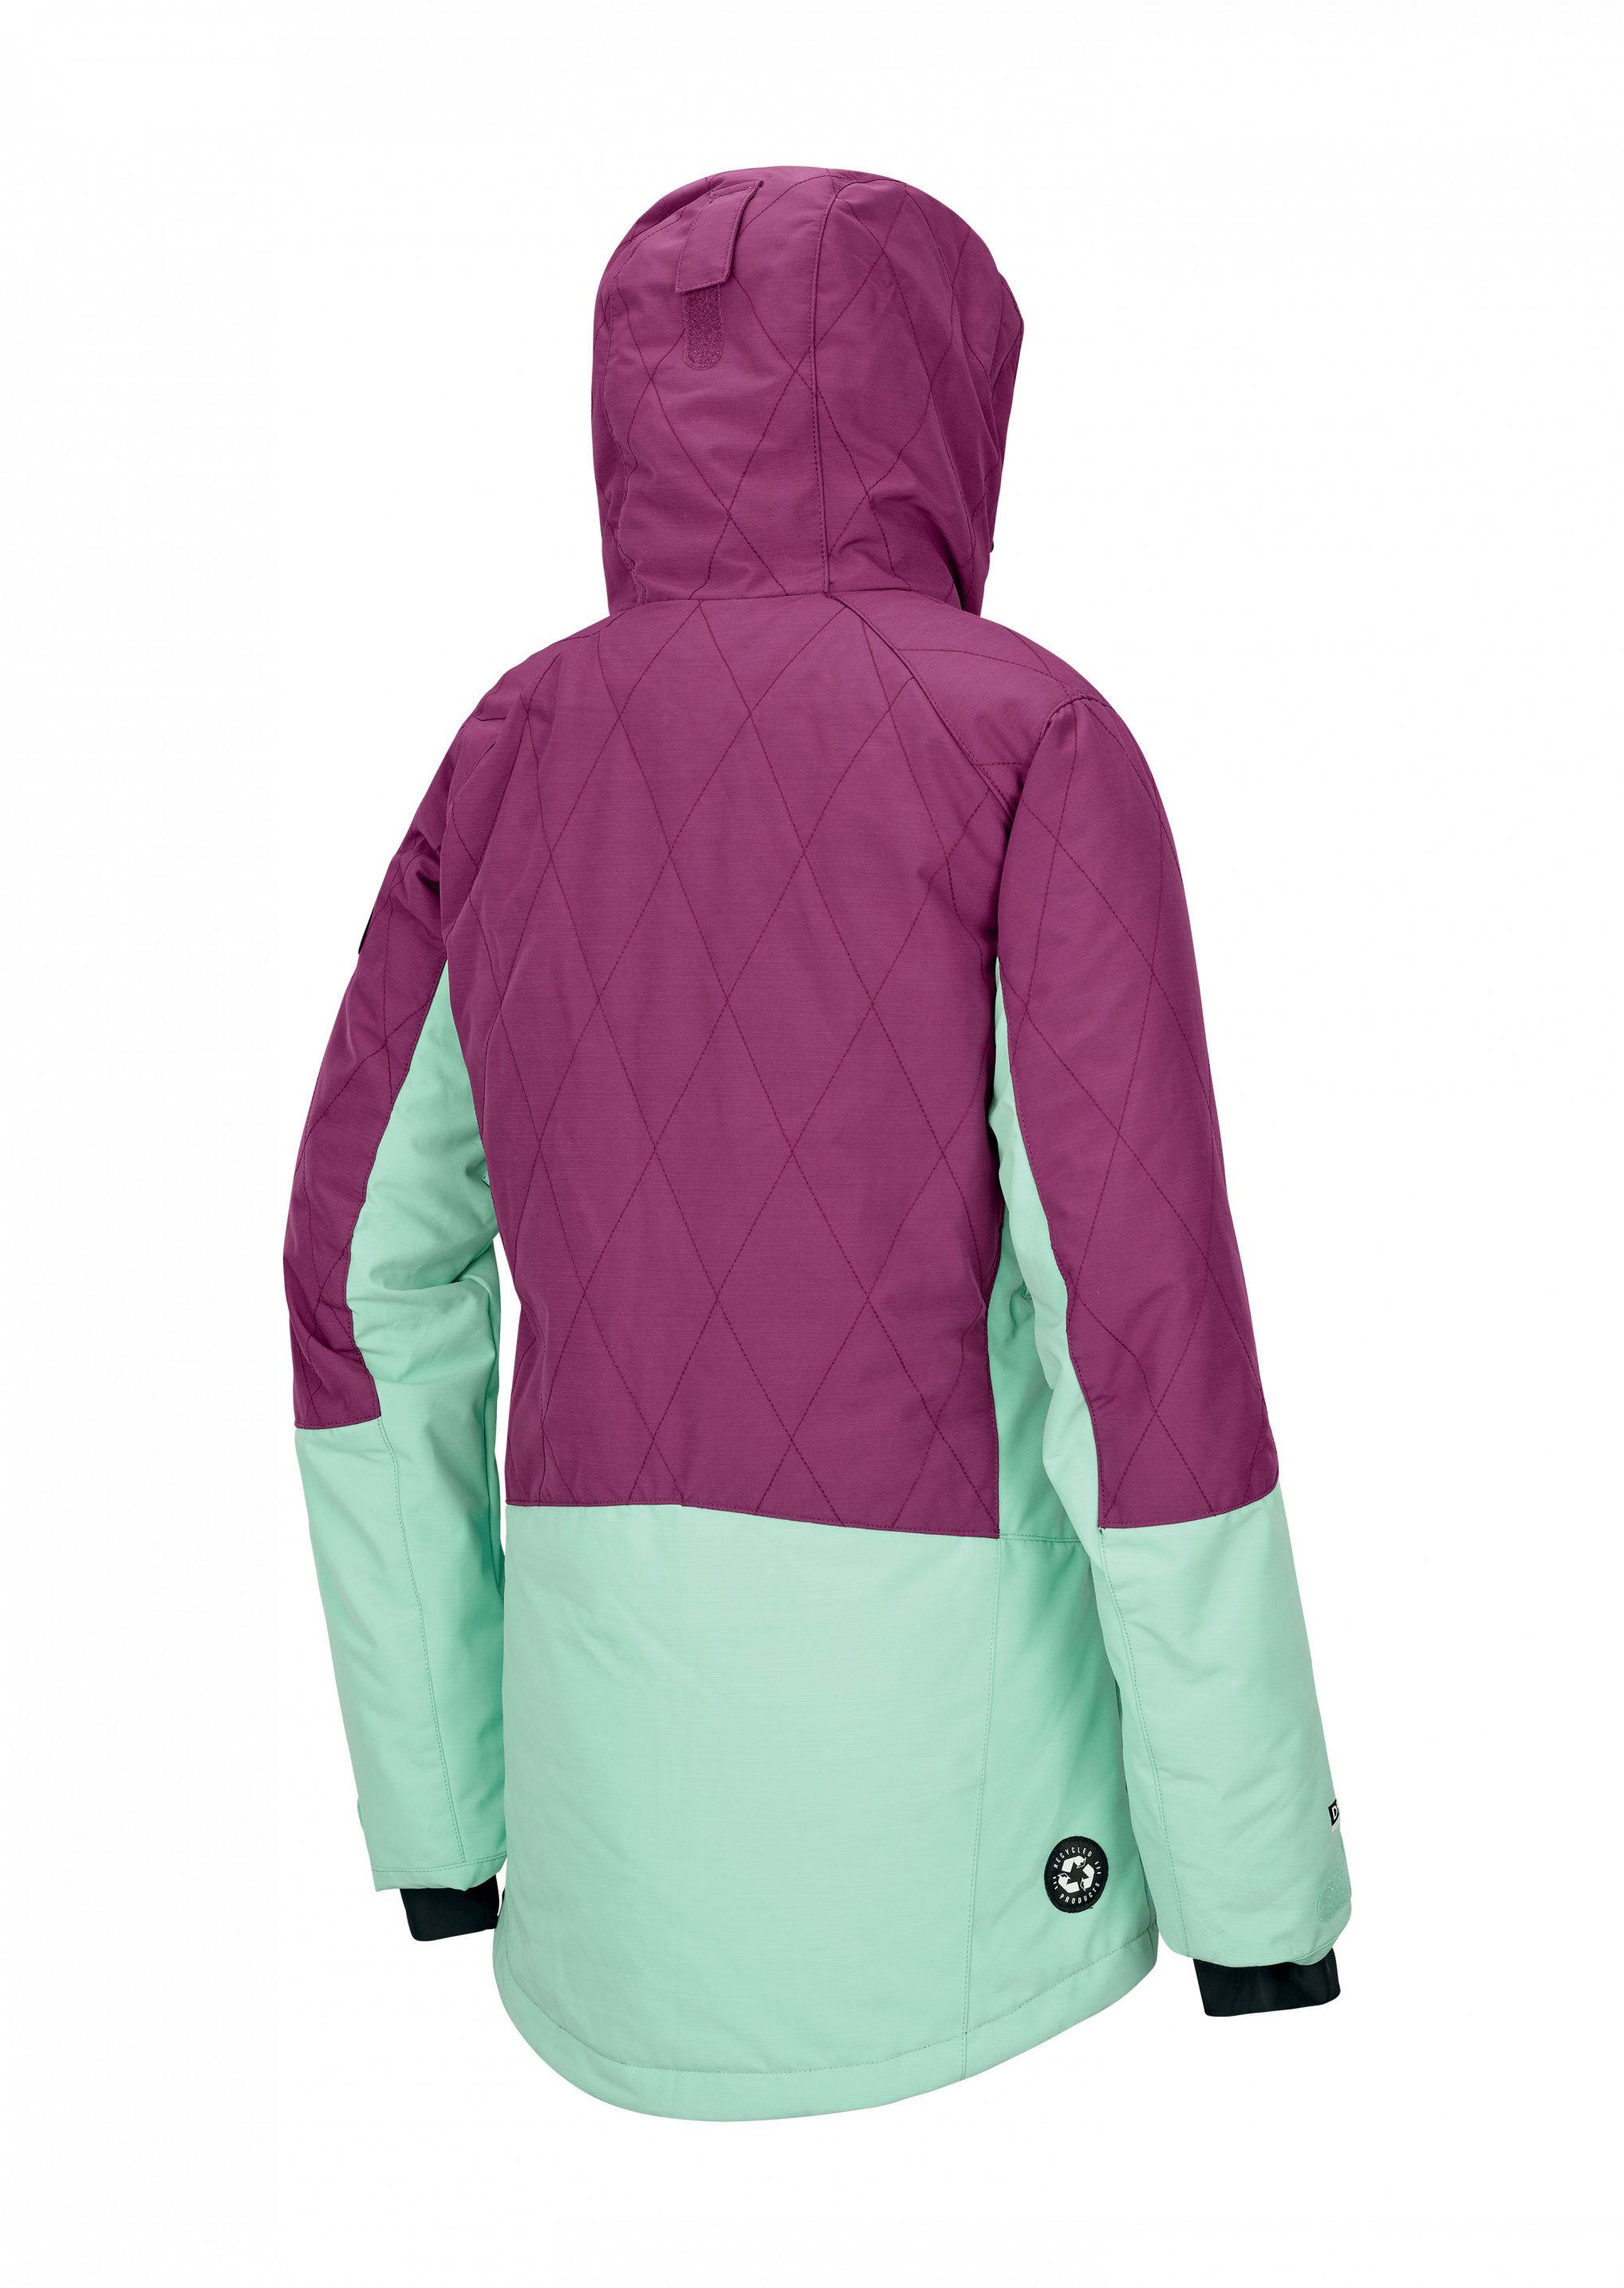 Picture Organic Clothing Mineral Jacket Women’s Raspberry M